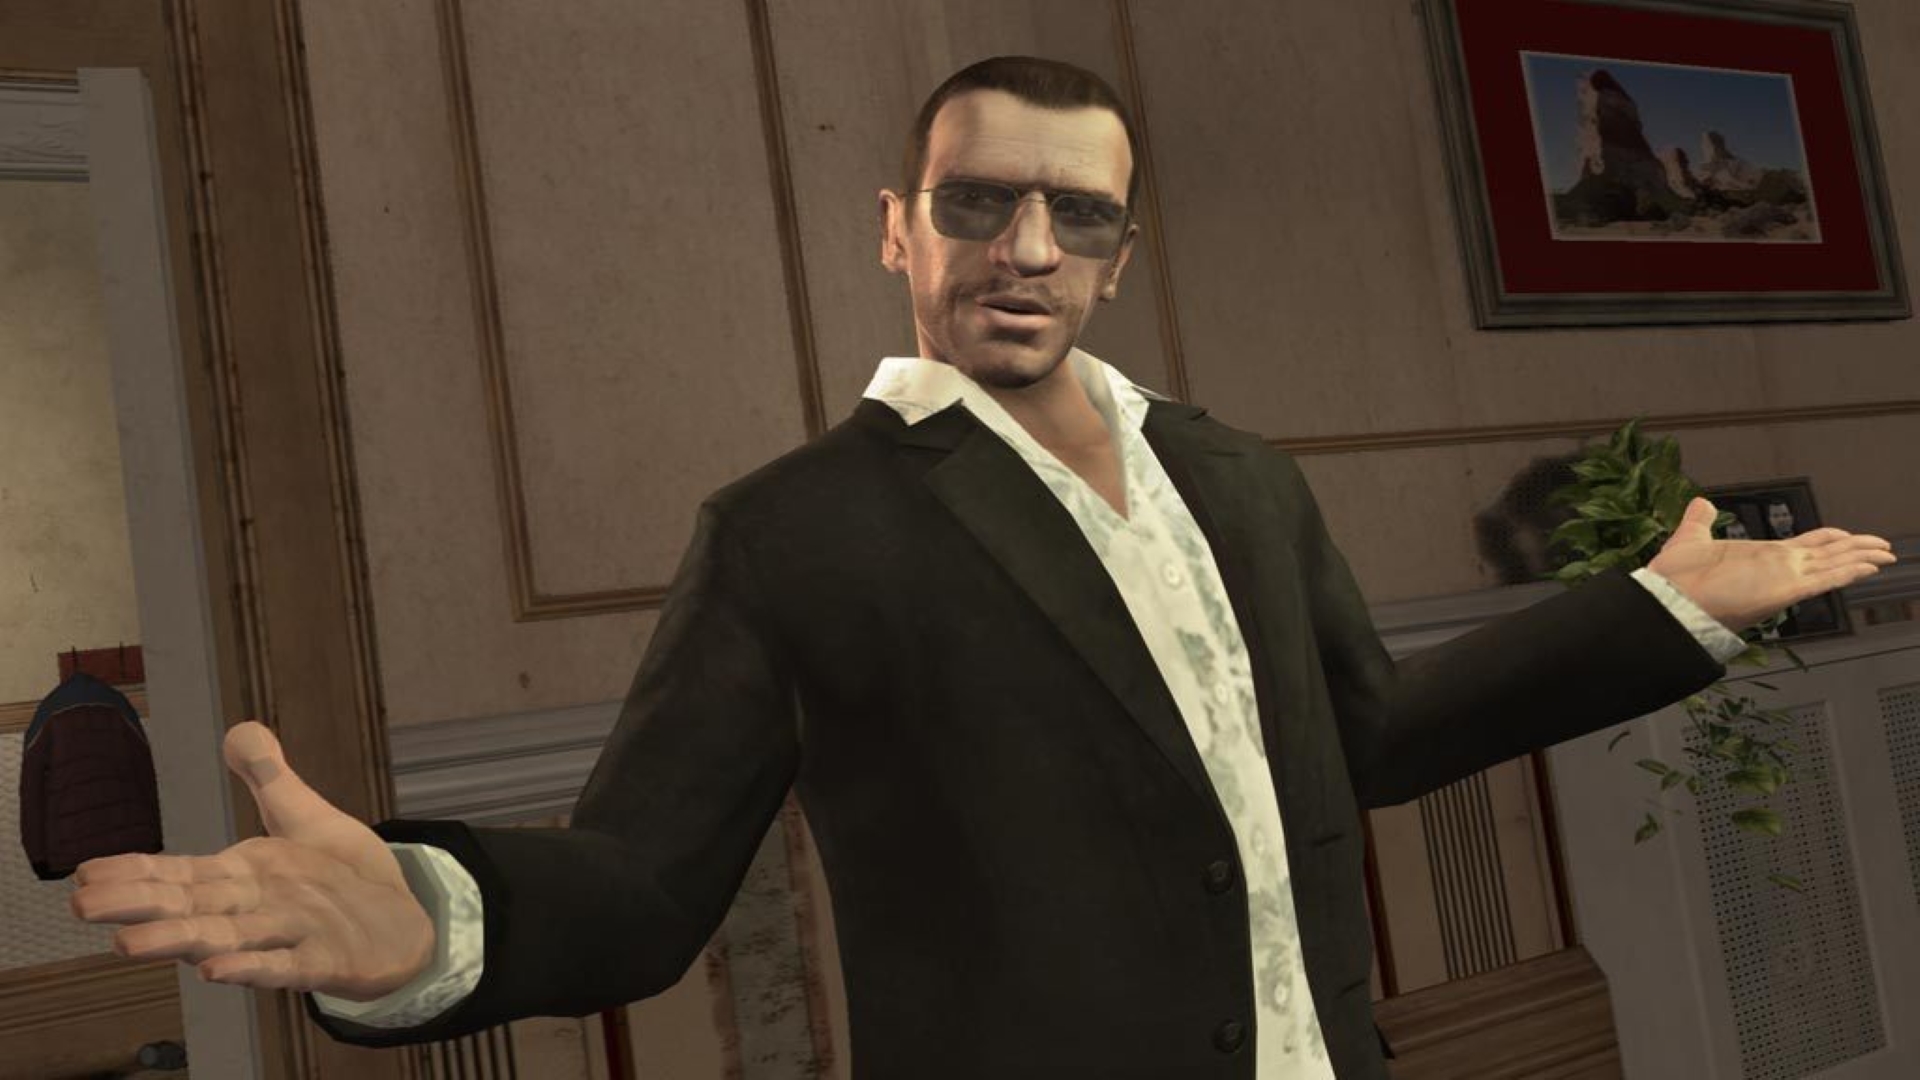 GTA IV download: How to download GTA 4 on PC, system requirements, and more